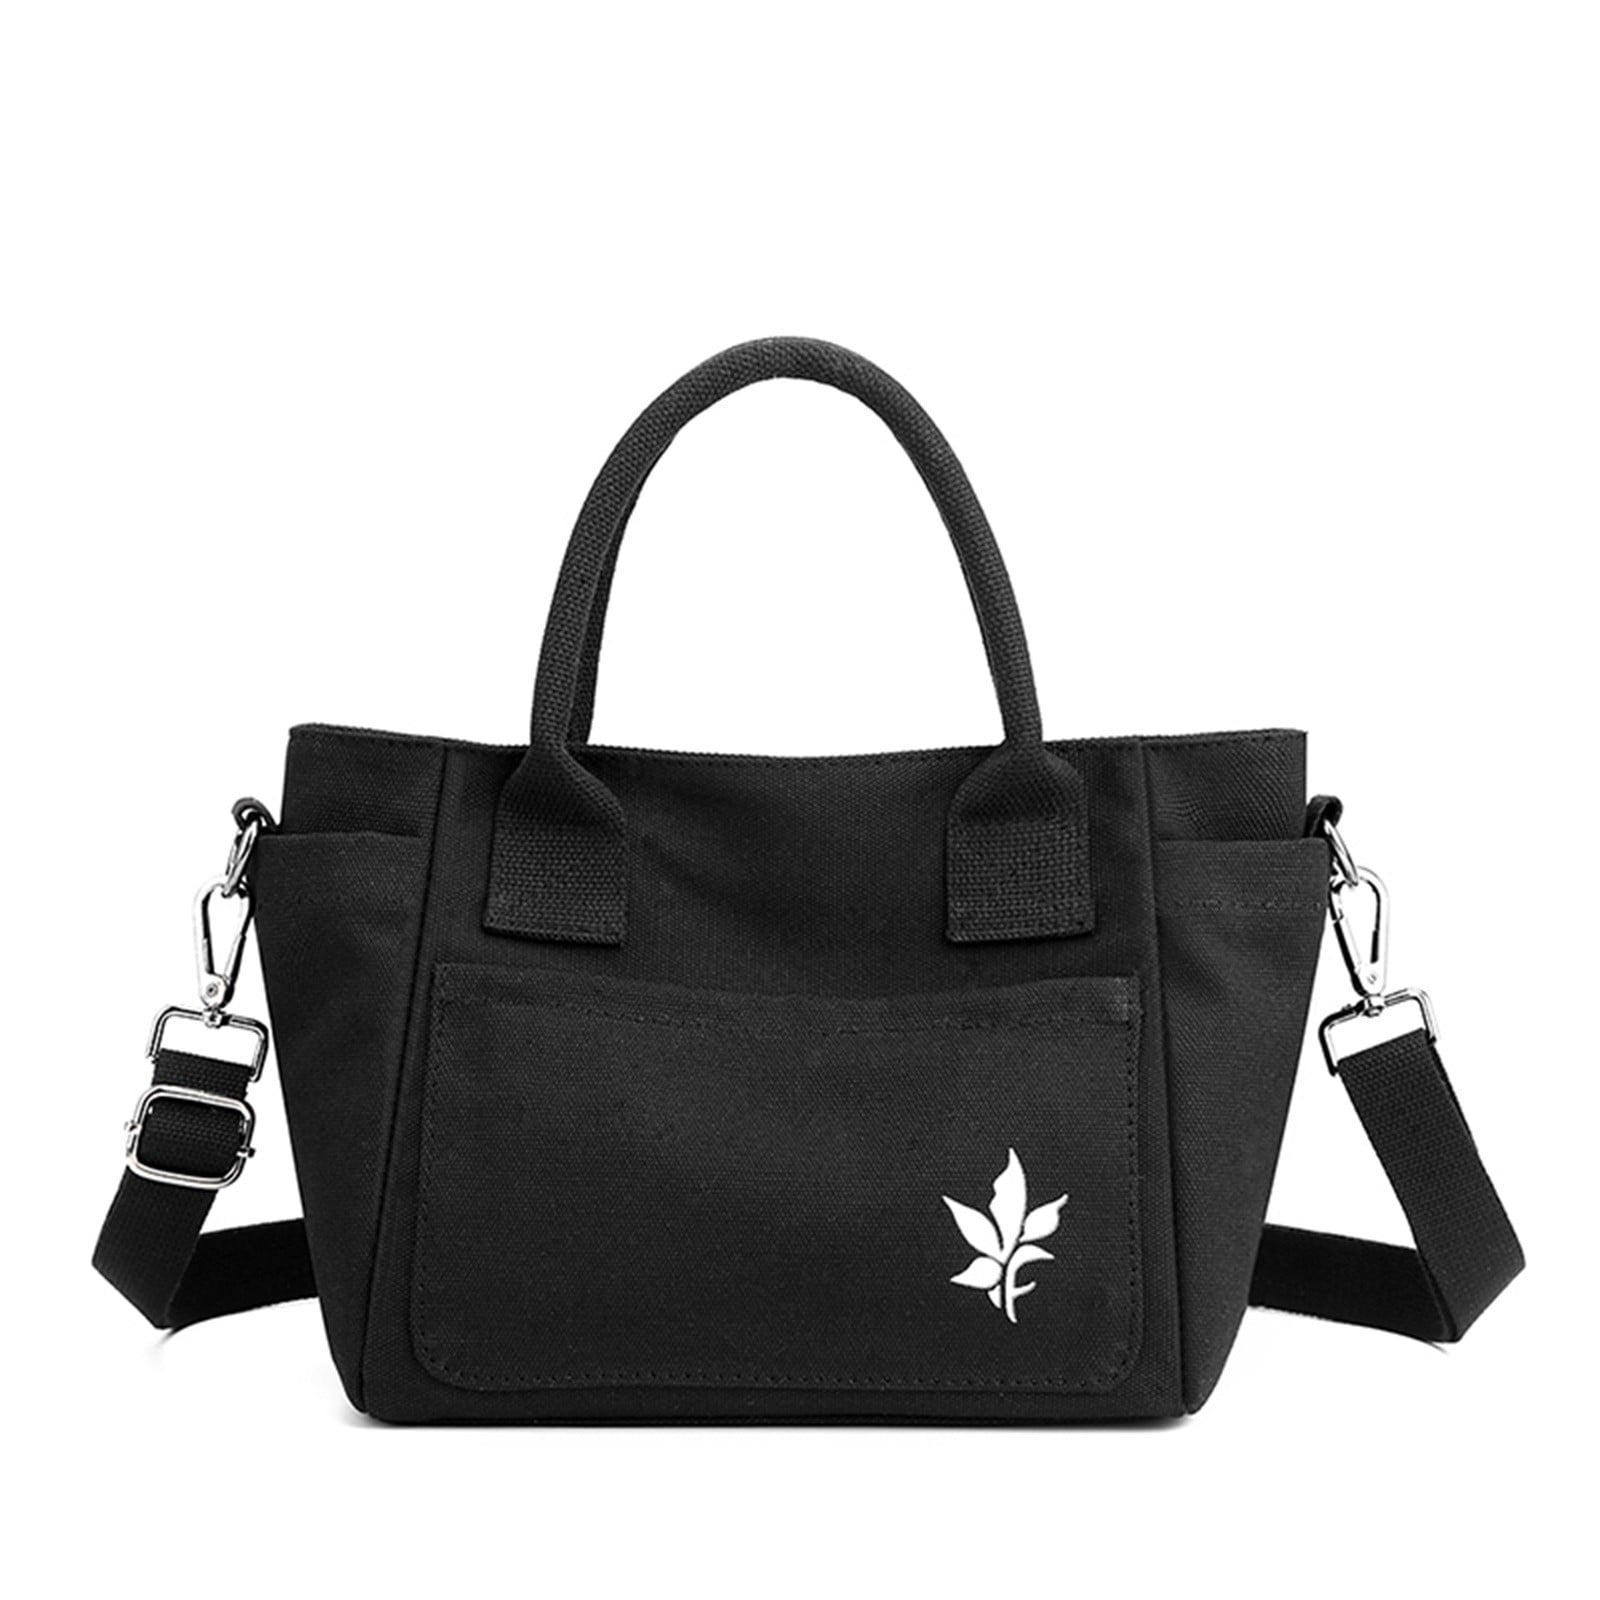 Pmuybhf Tote Bag for Women Work Large Large Crossbody Bags for Women Extra Long Straps Women Bag Can Be Connected to USB Fashion Soft Leather Portable